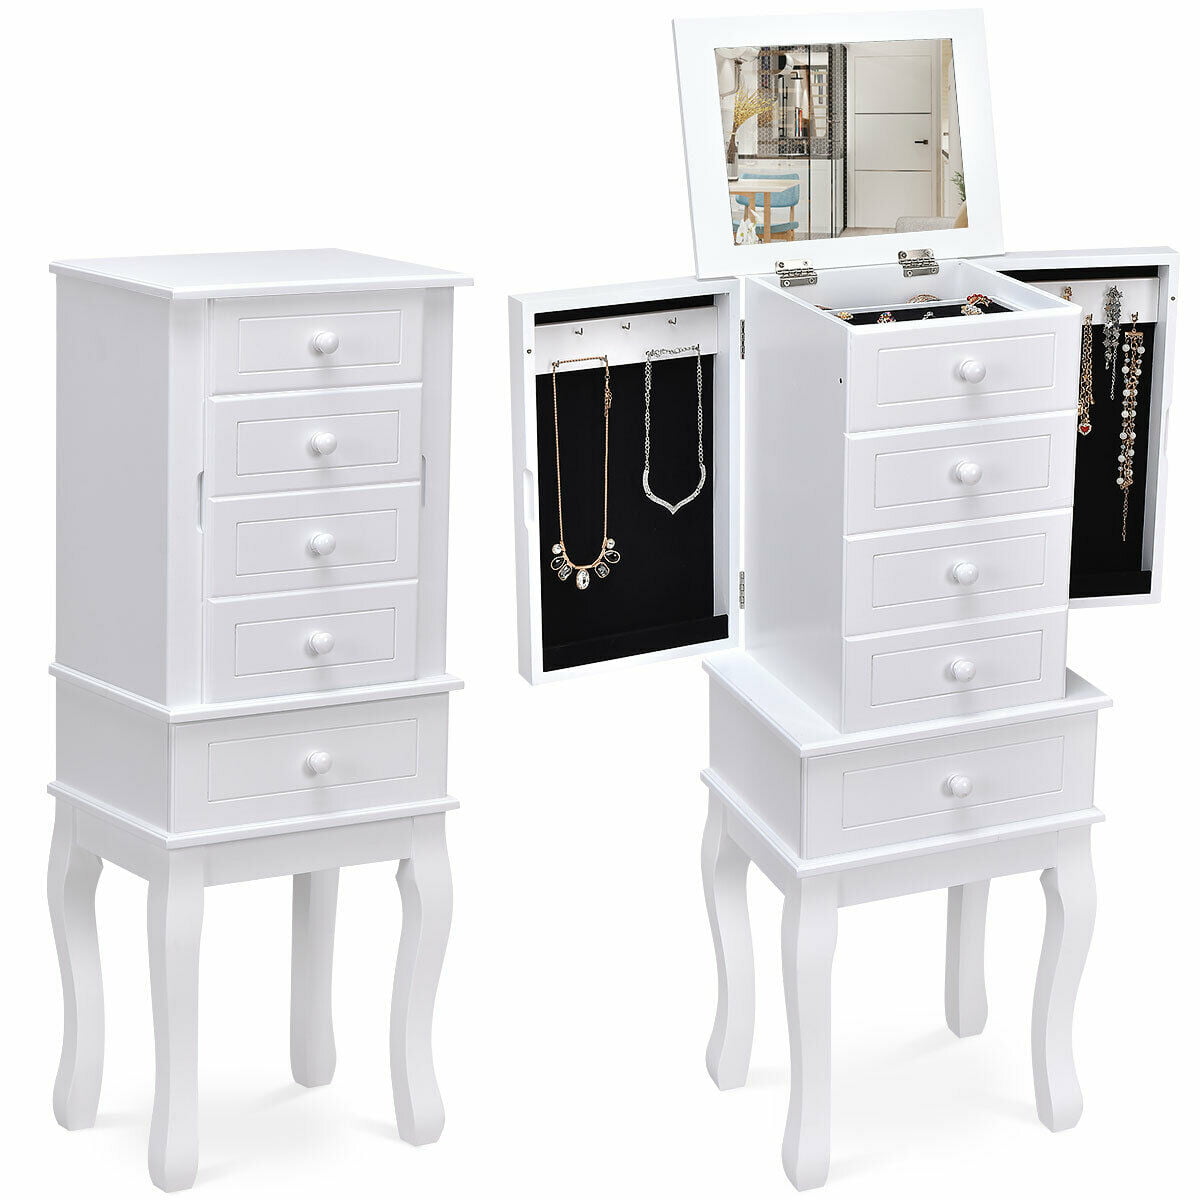 Women Stand Mirrored Cabinet Armoire Dressing Mirror Jewelry Ring Storage Box US 